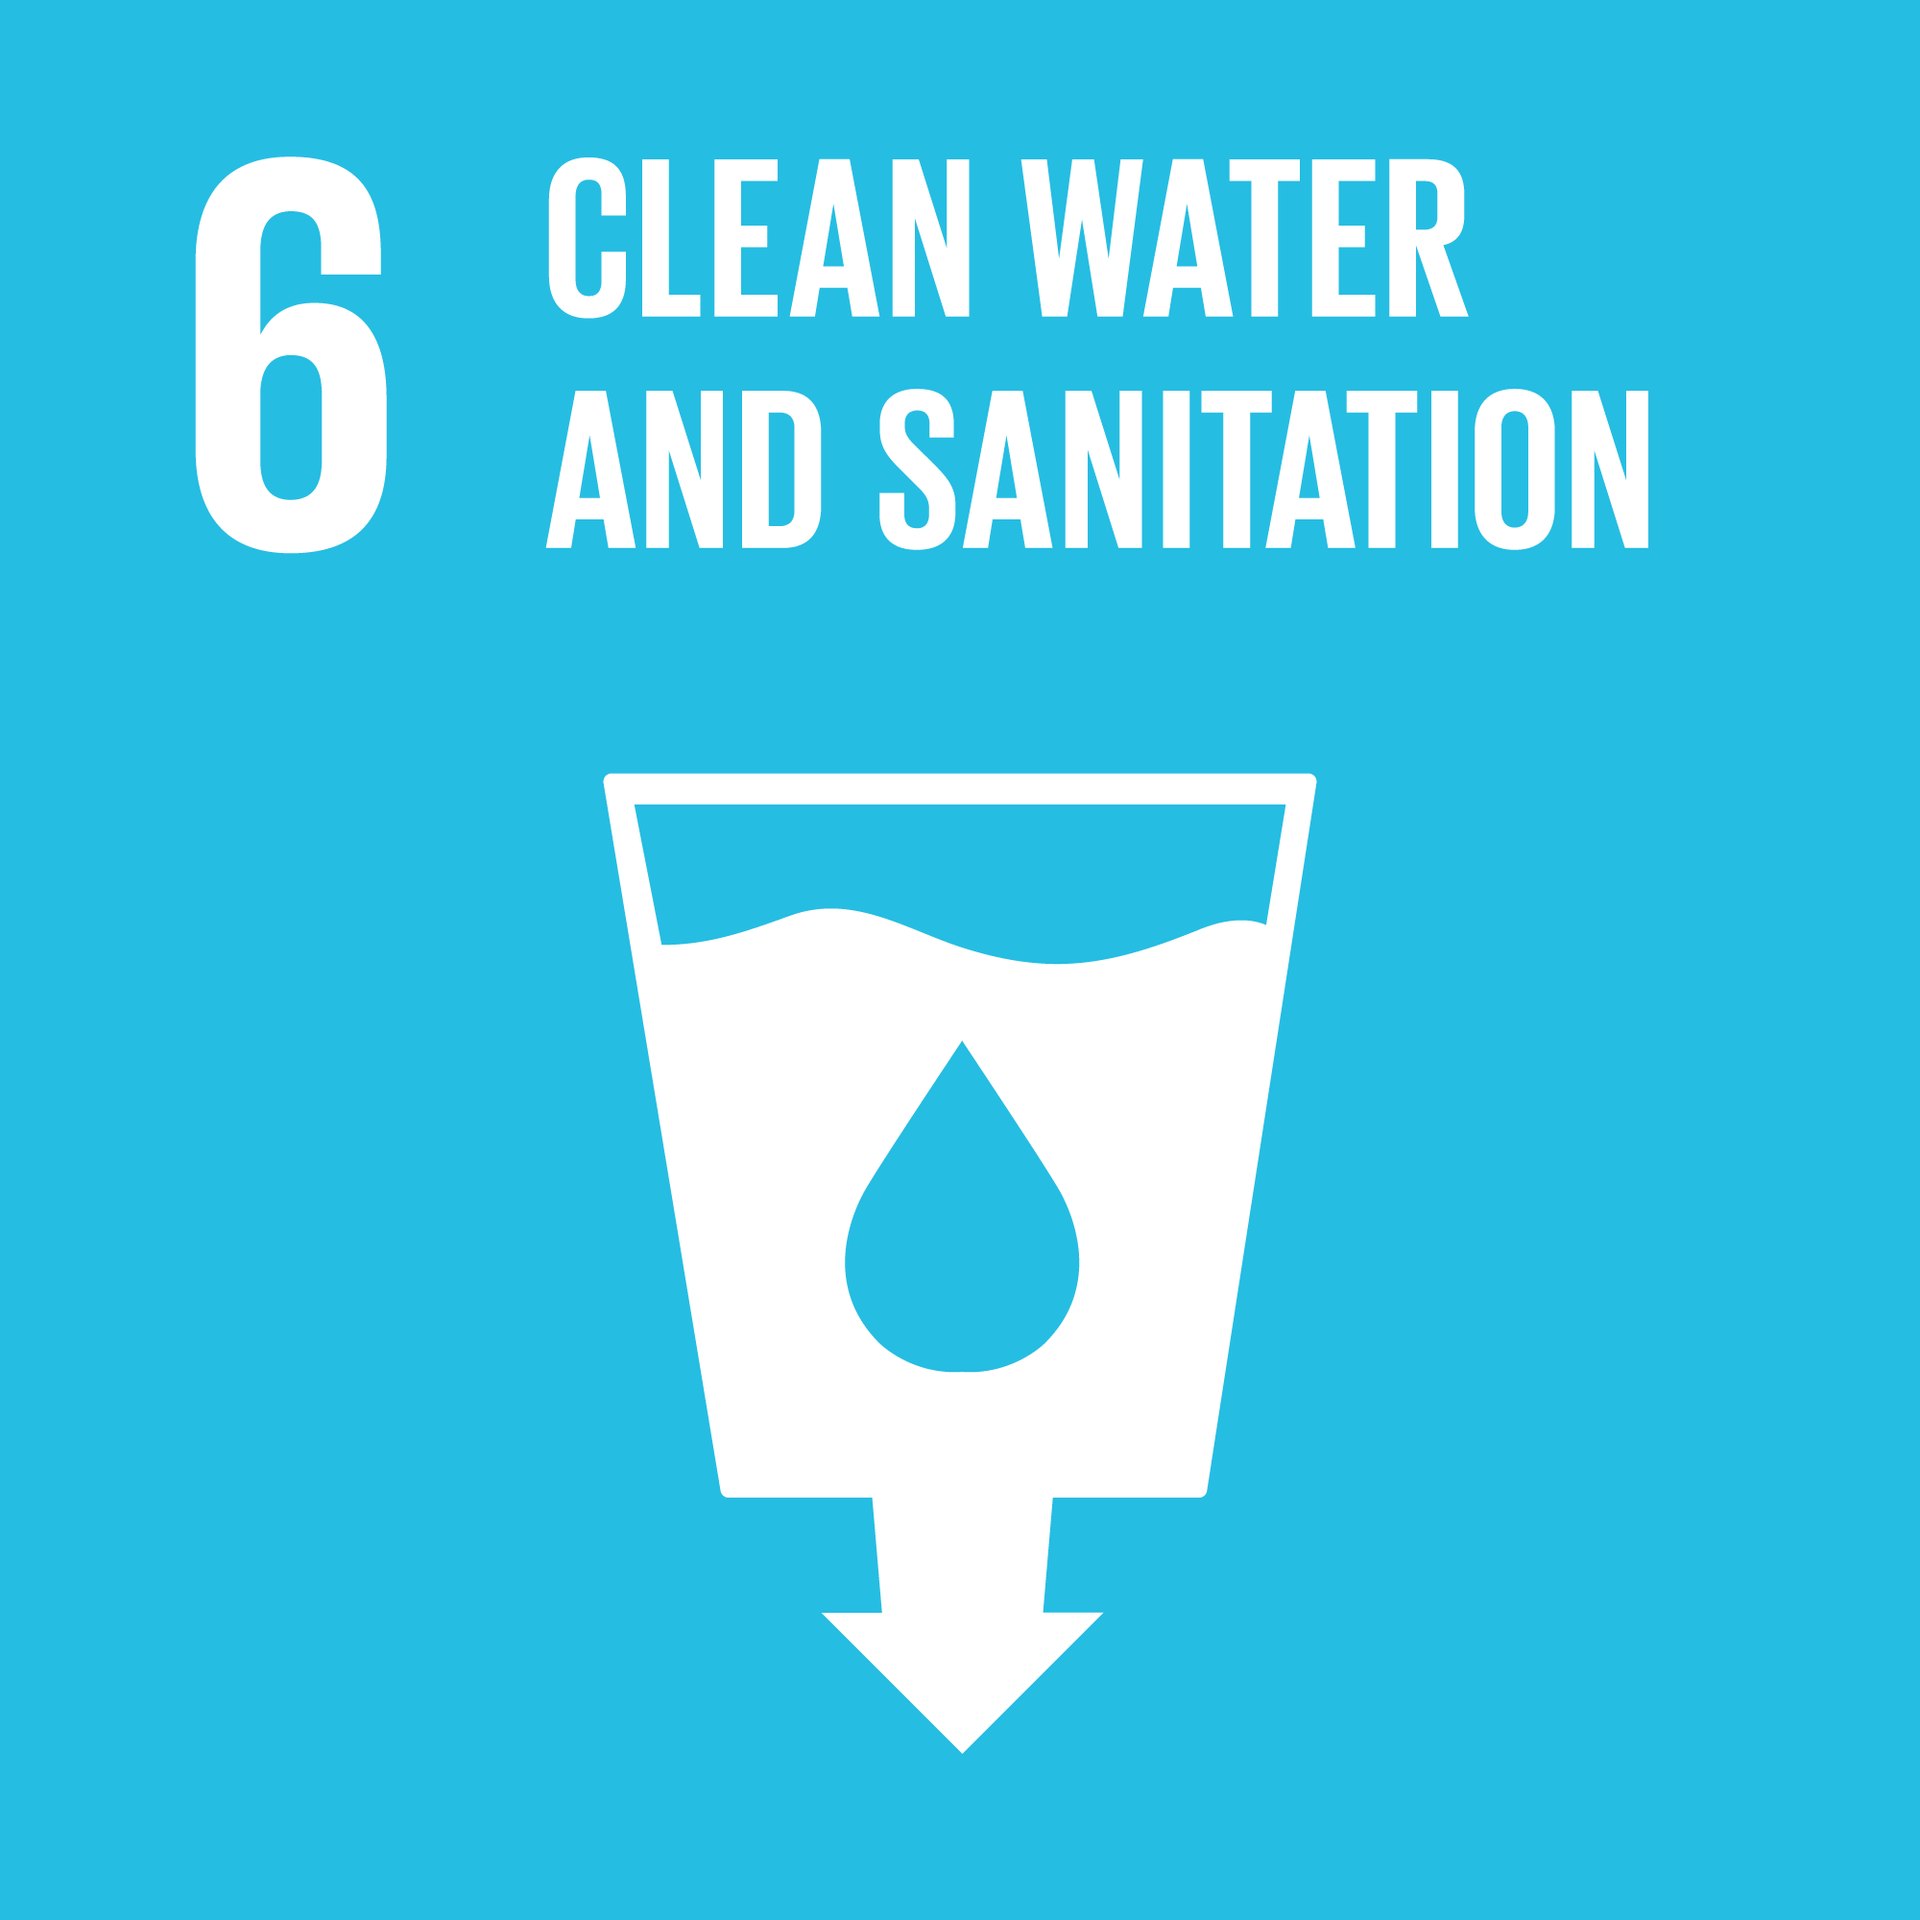 A sign that says `` clean water and sanitation '' with a glass of water and an arrow pointing down.